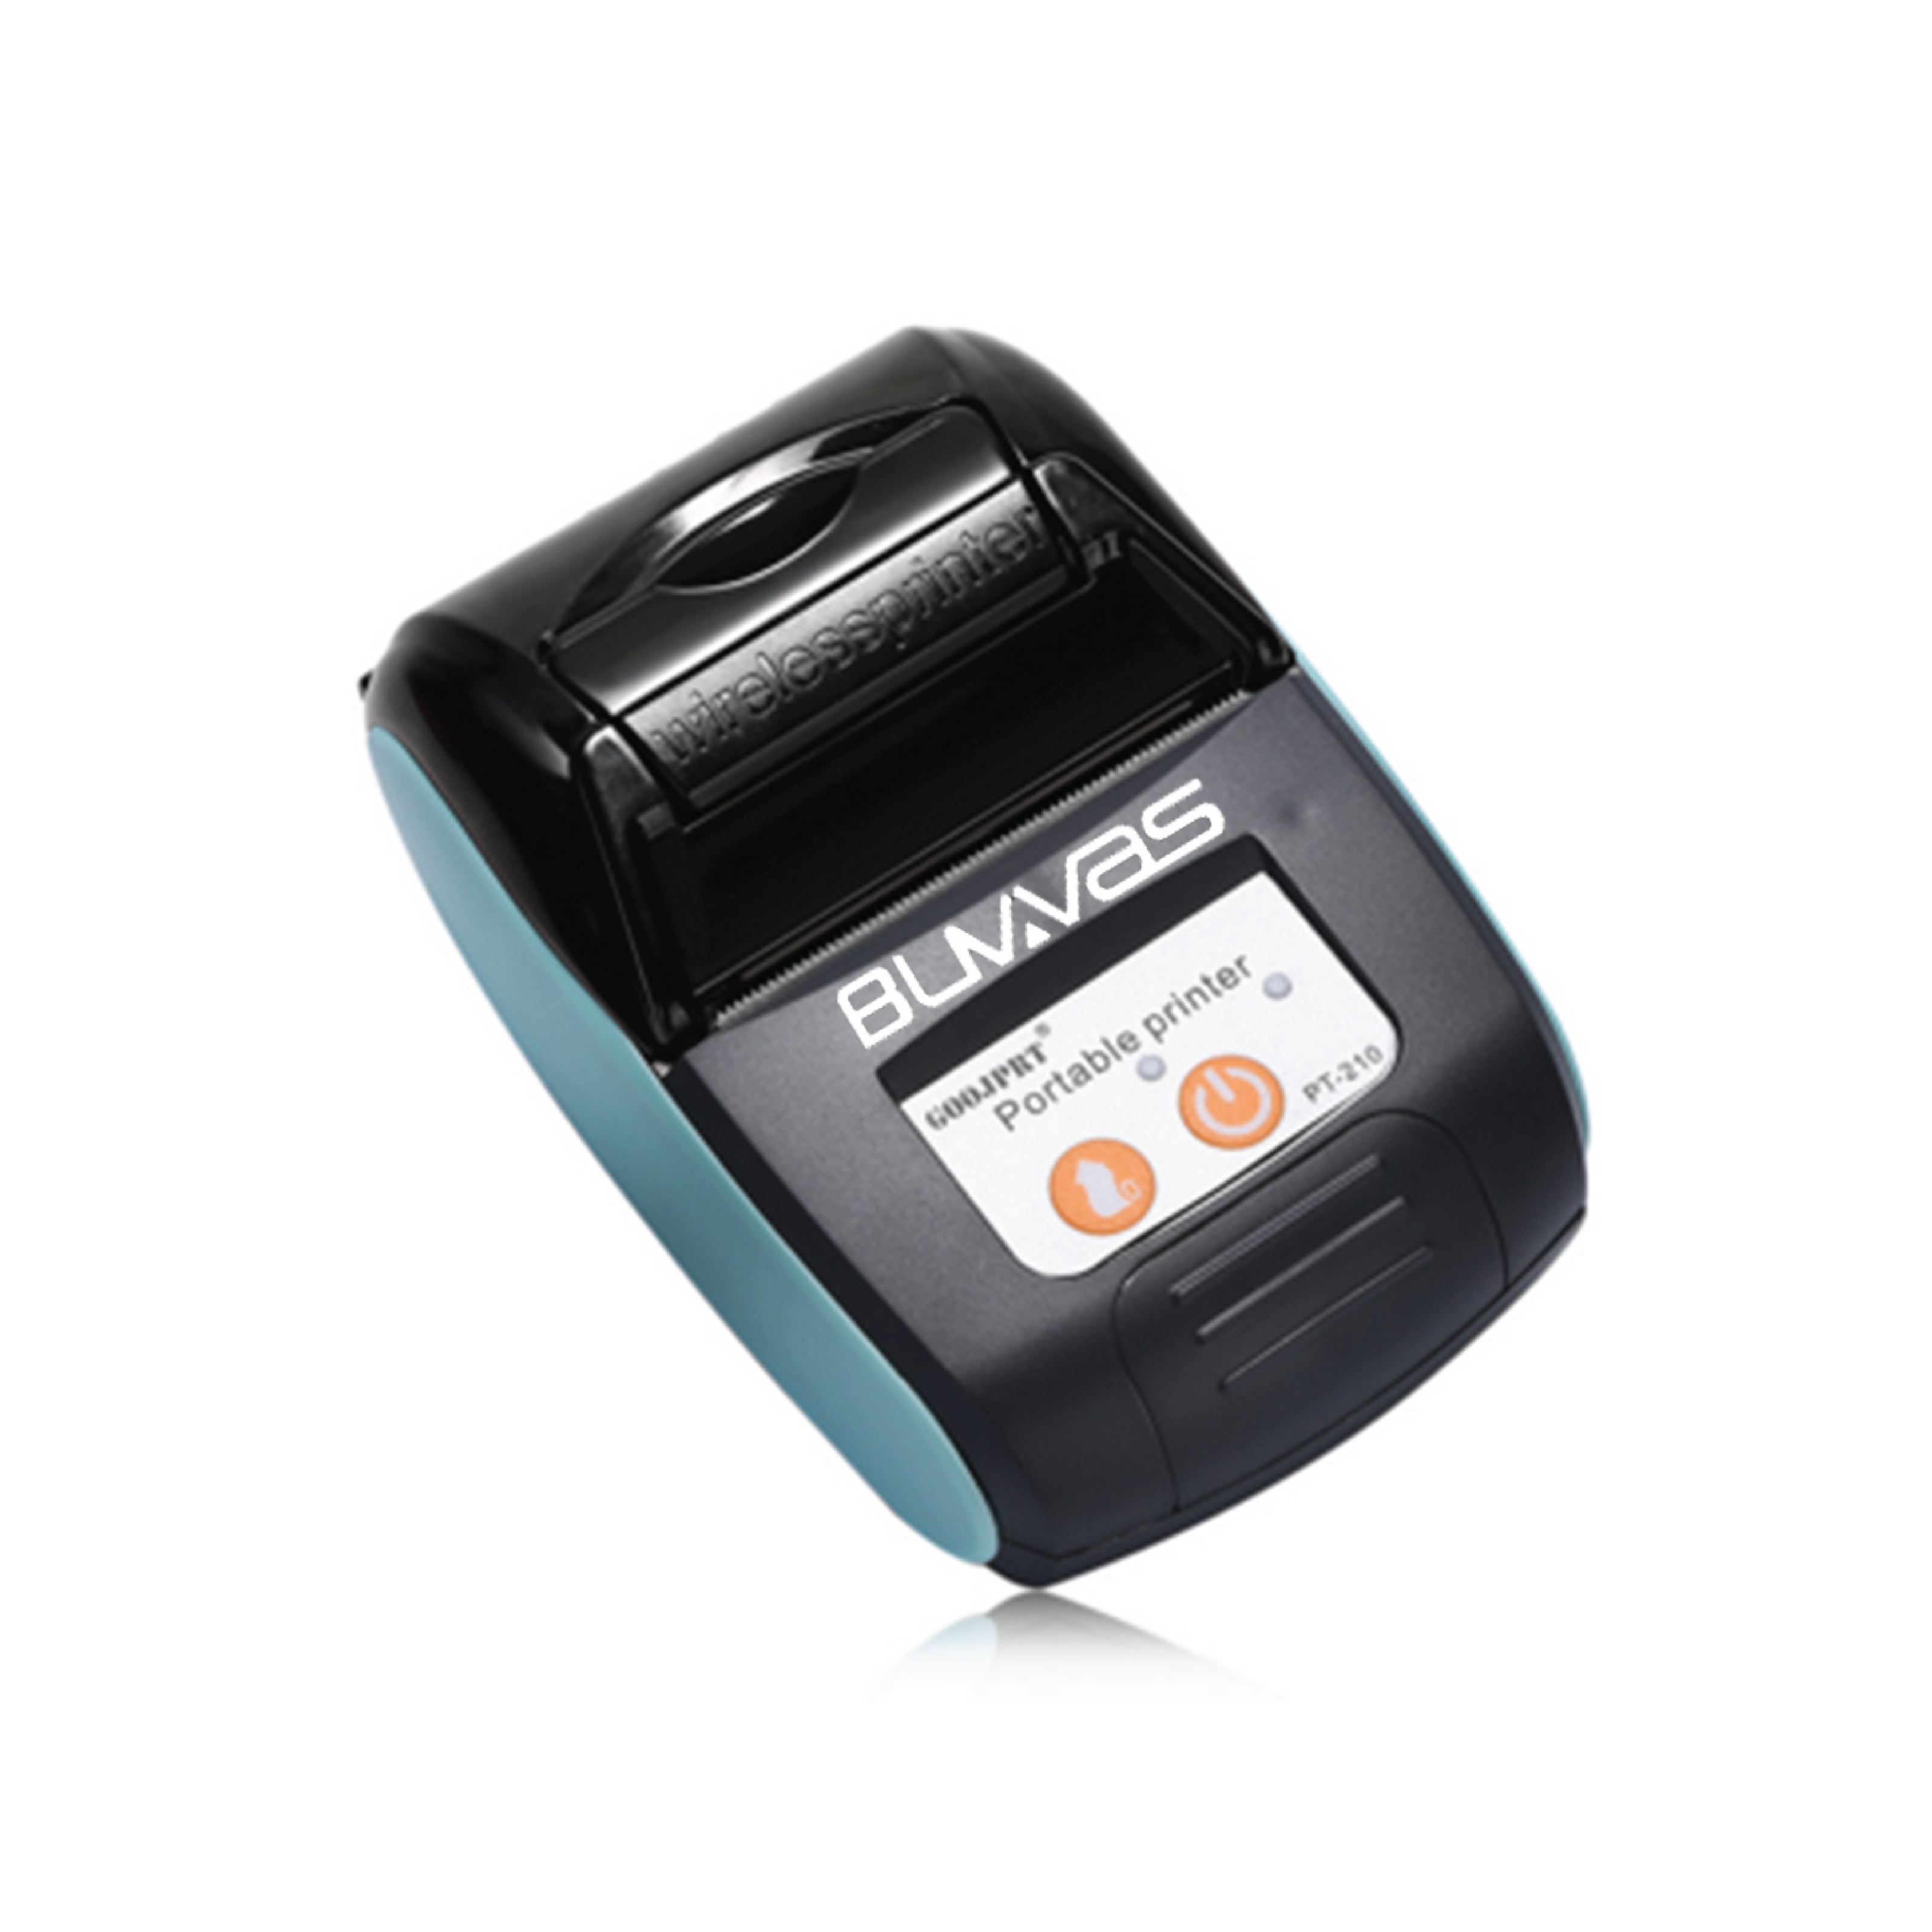 Buvvas PT-210 Thermal Receipt Printer Regular priceRs. 4,999.00 Sale priceRs. 3,500.00Sale Tax included. Key Specifications Paper Size : 58mm (2 Inch) Print Speed : 90mm/sec Printer head Life : 50km Manual Cut Battery : 1500 mAh Interface USB + BLUETOOTH